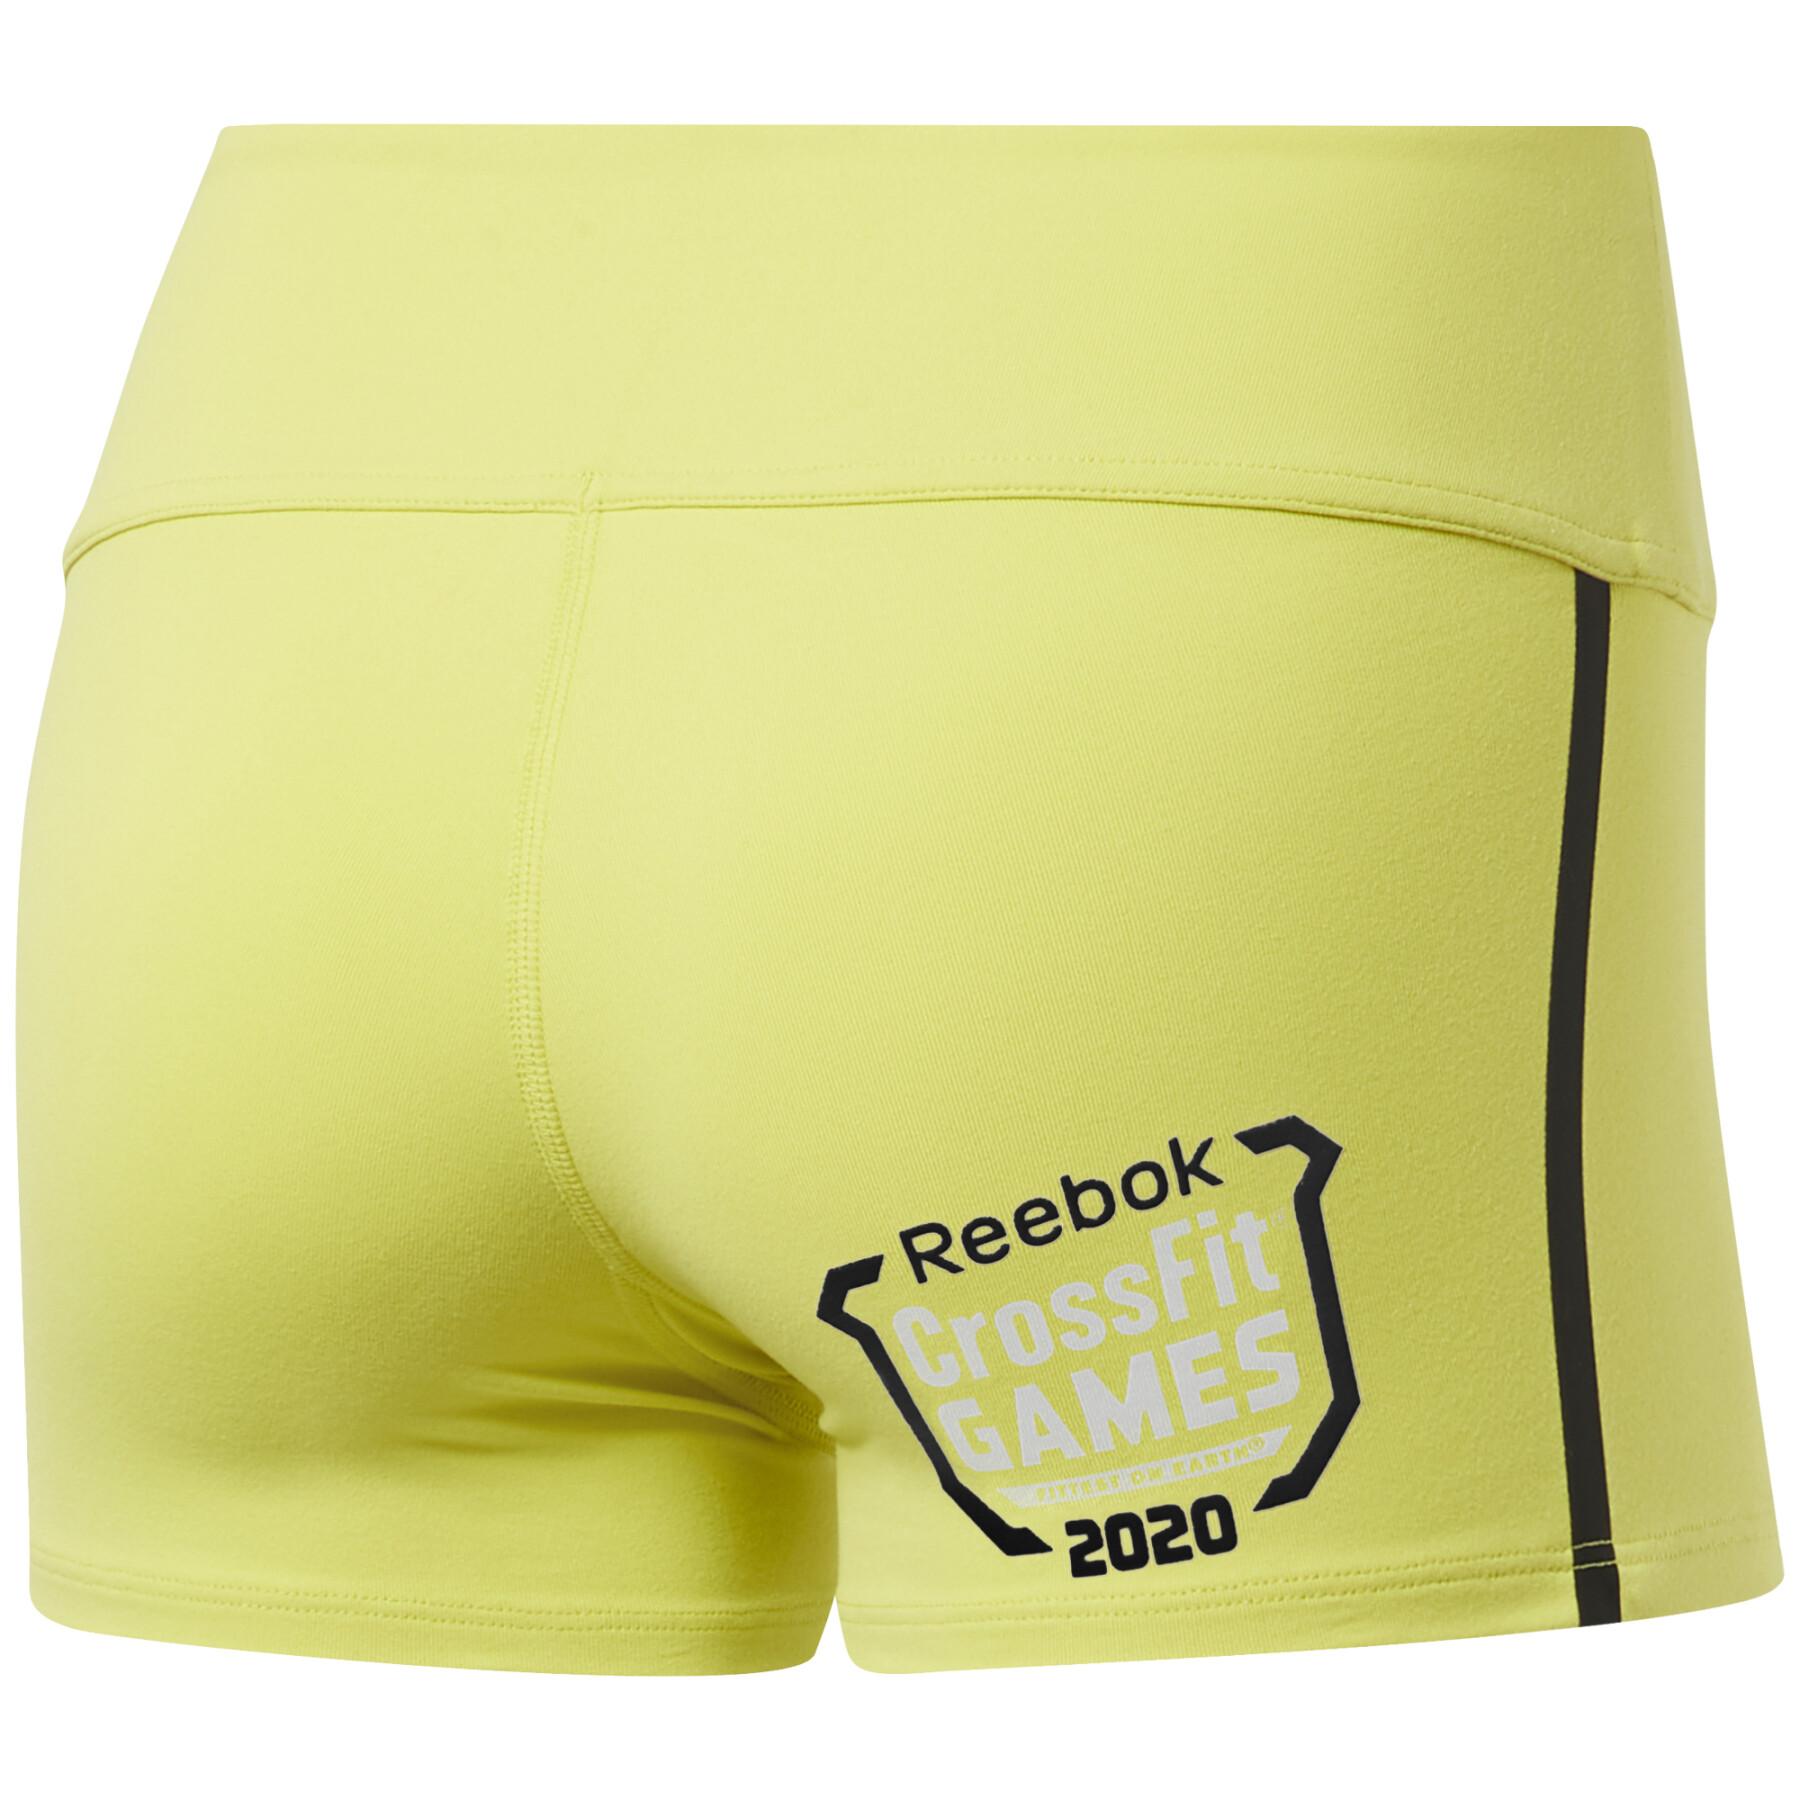 Women's shorts Reebok CrossFit Games Chaseolid Booty